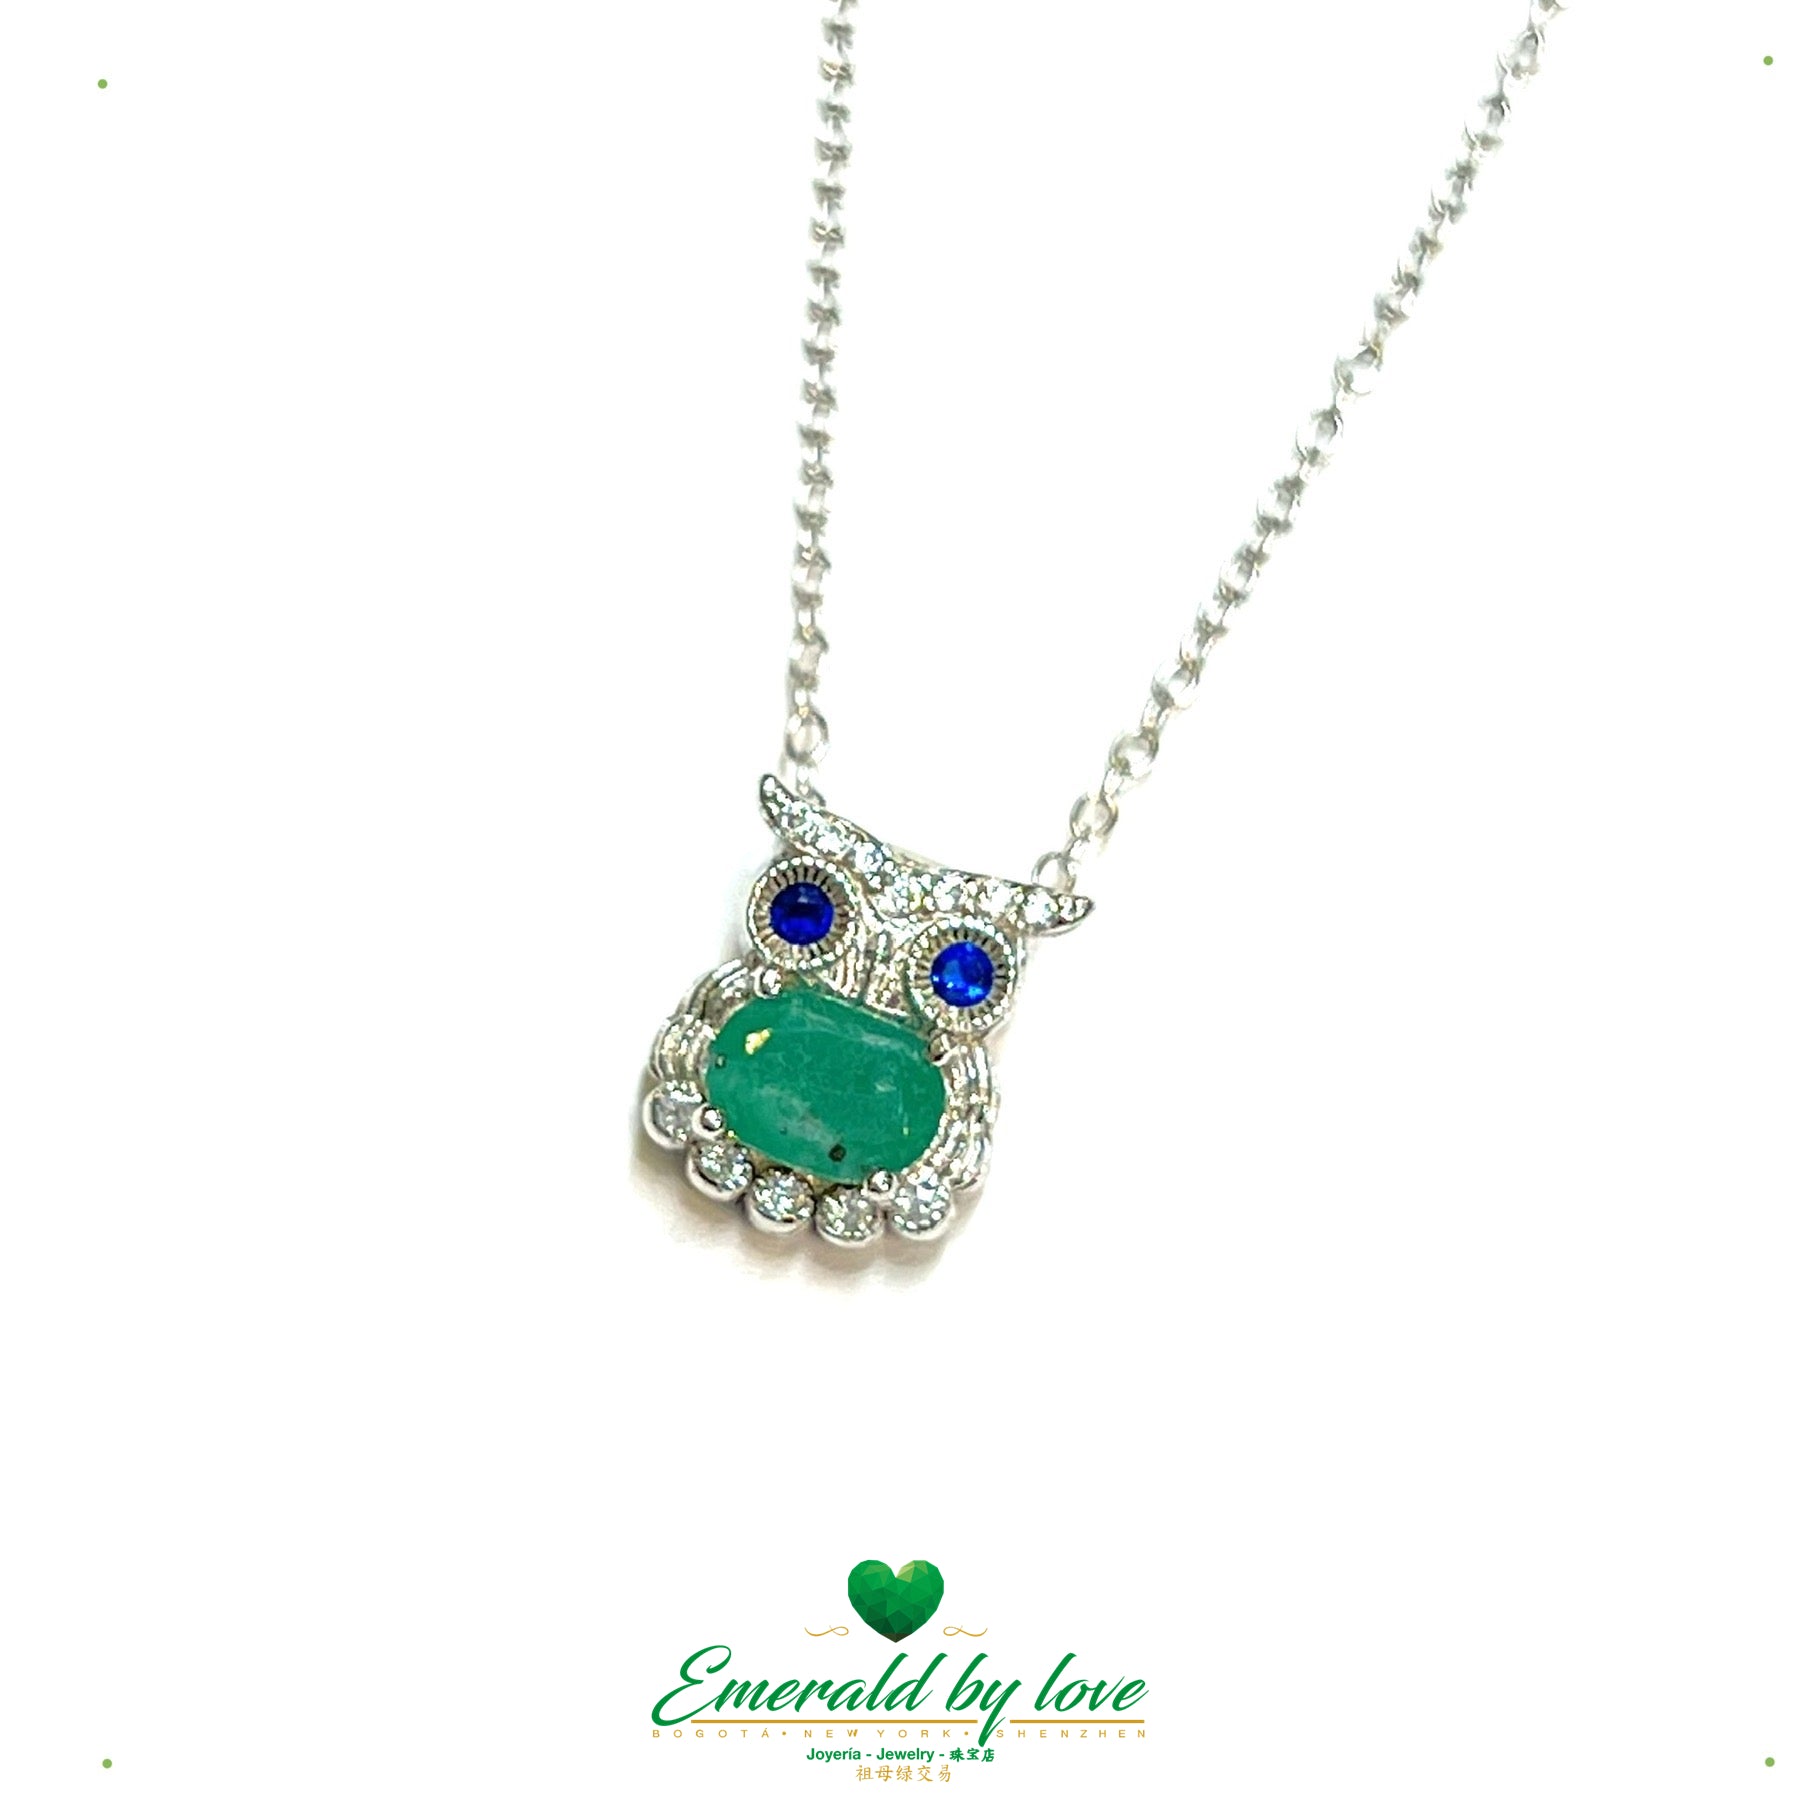 Adorable Owl Pendant with Central Oval Emerald